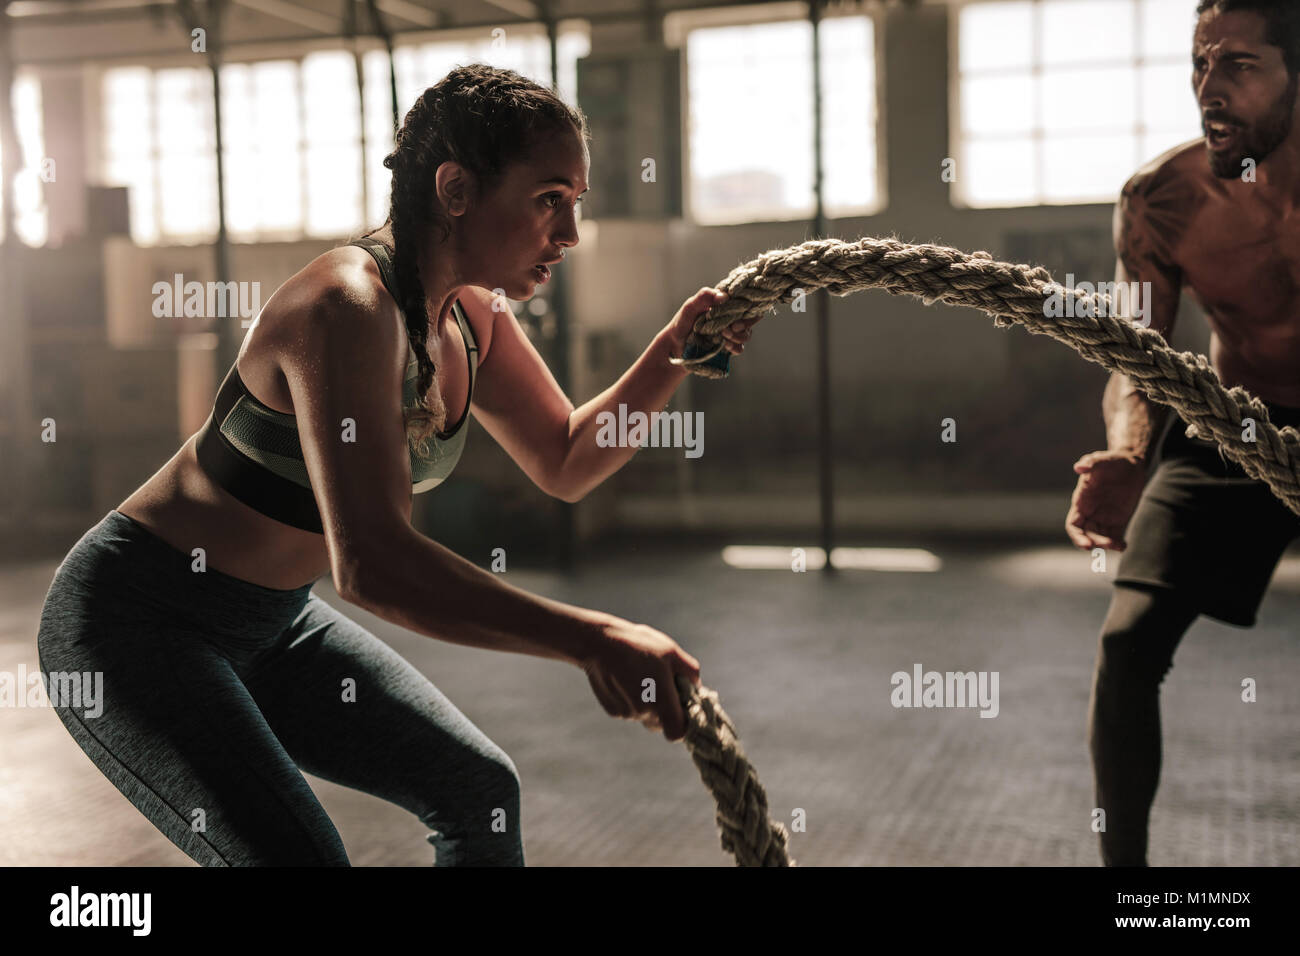 Caucasian strong man pulling rope, cross training gym Stock Photo